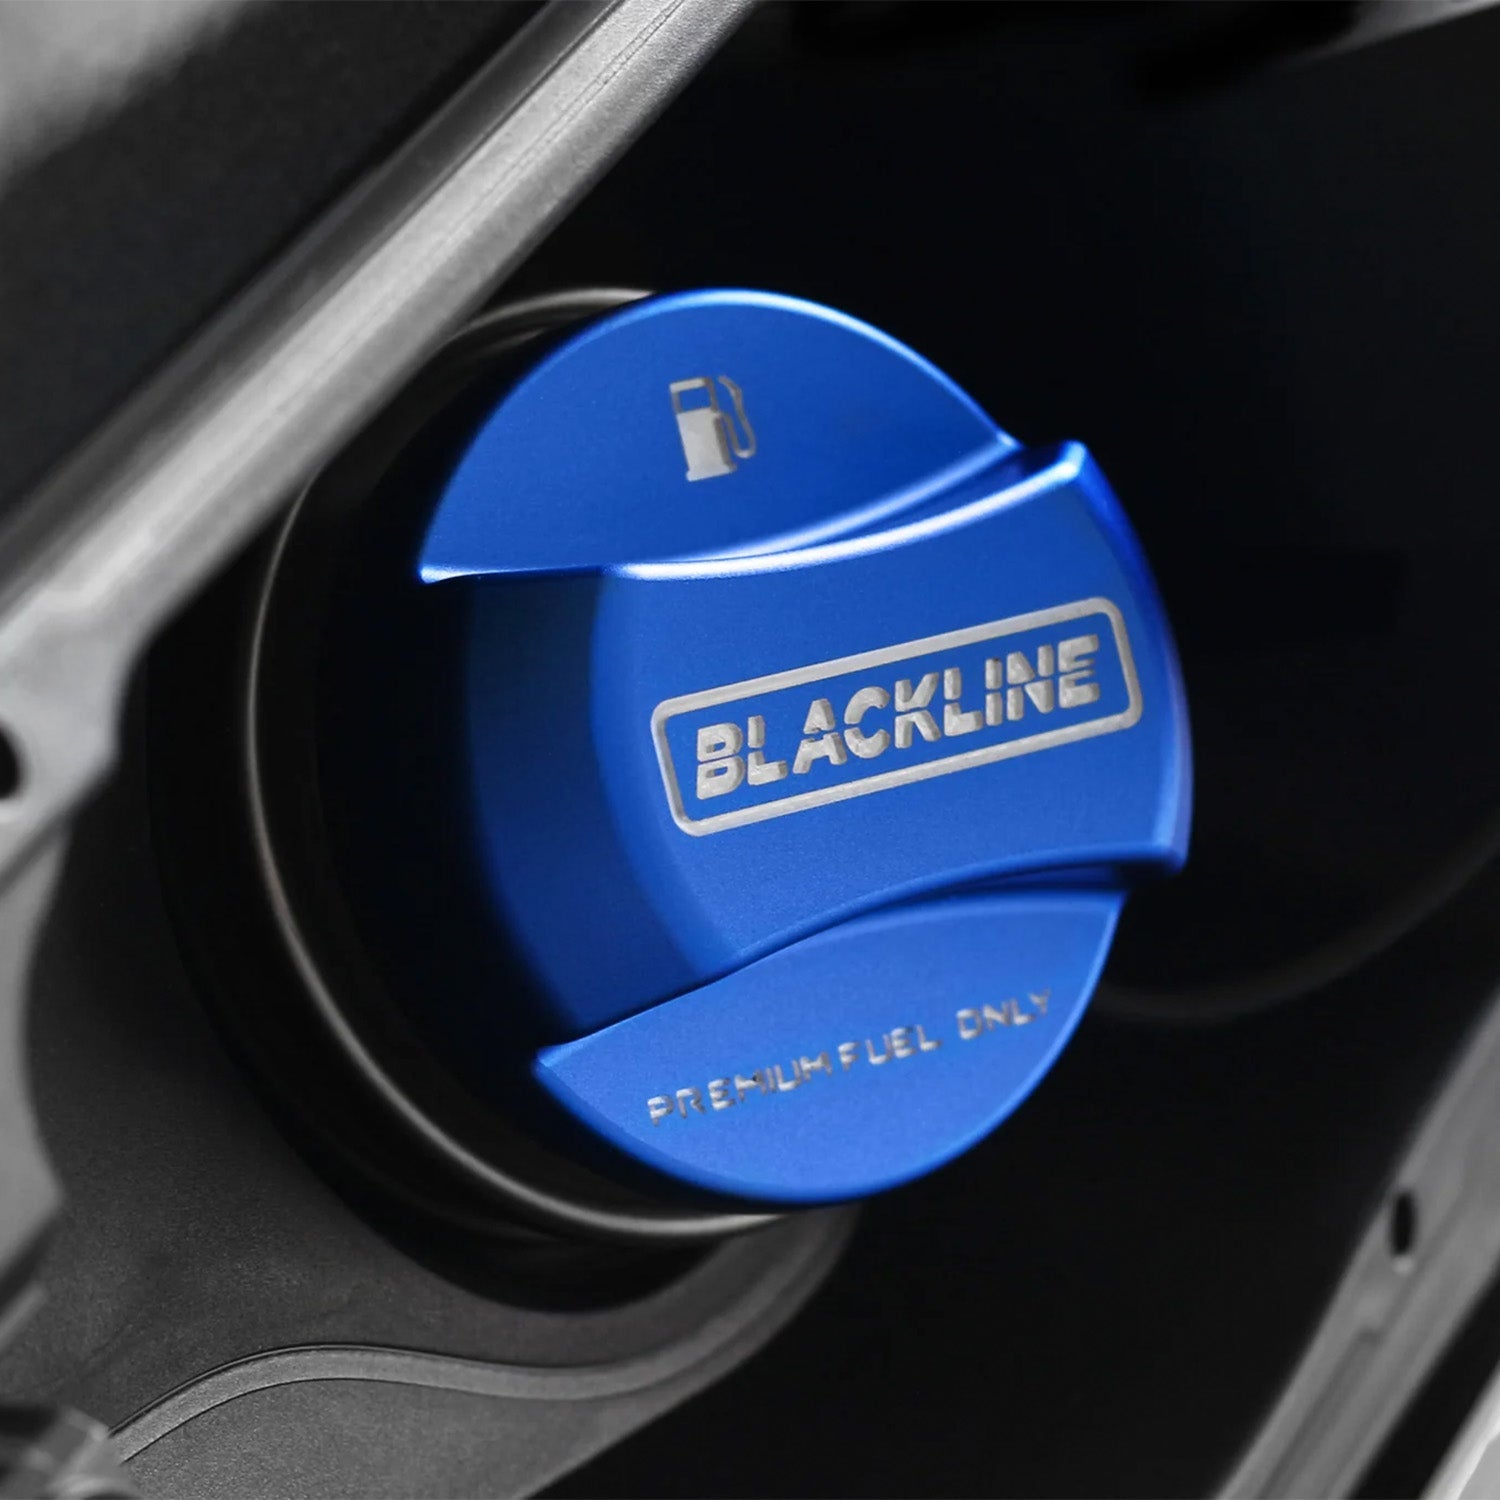 GoldenWrench BMW BLACKLINE "Premium Fuel Only" Performance Fuel Cap Cover for BMW (2010+)